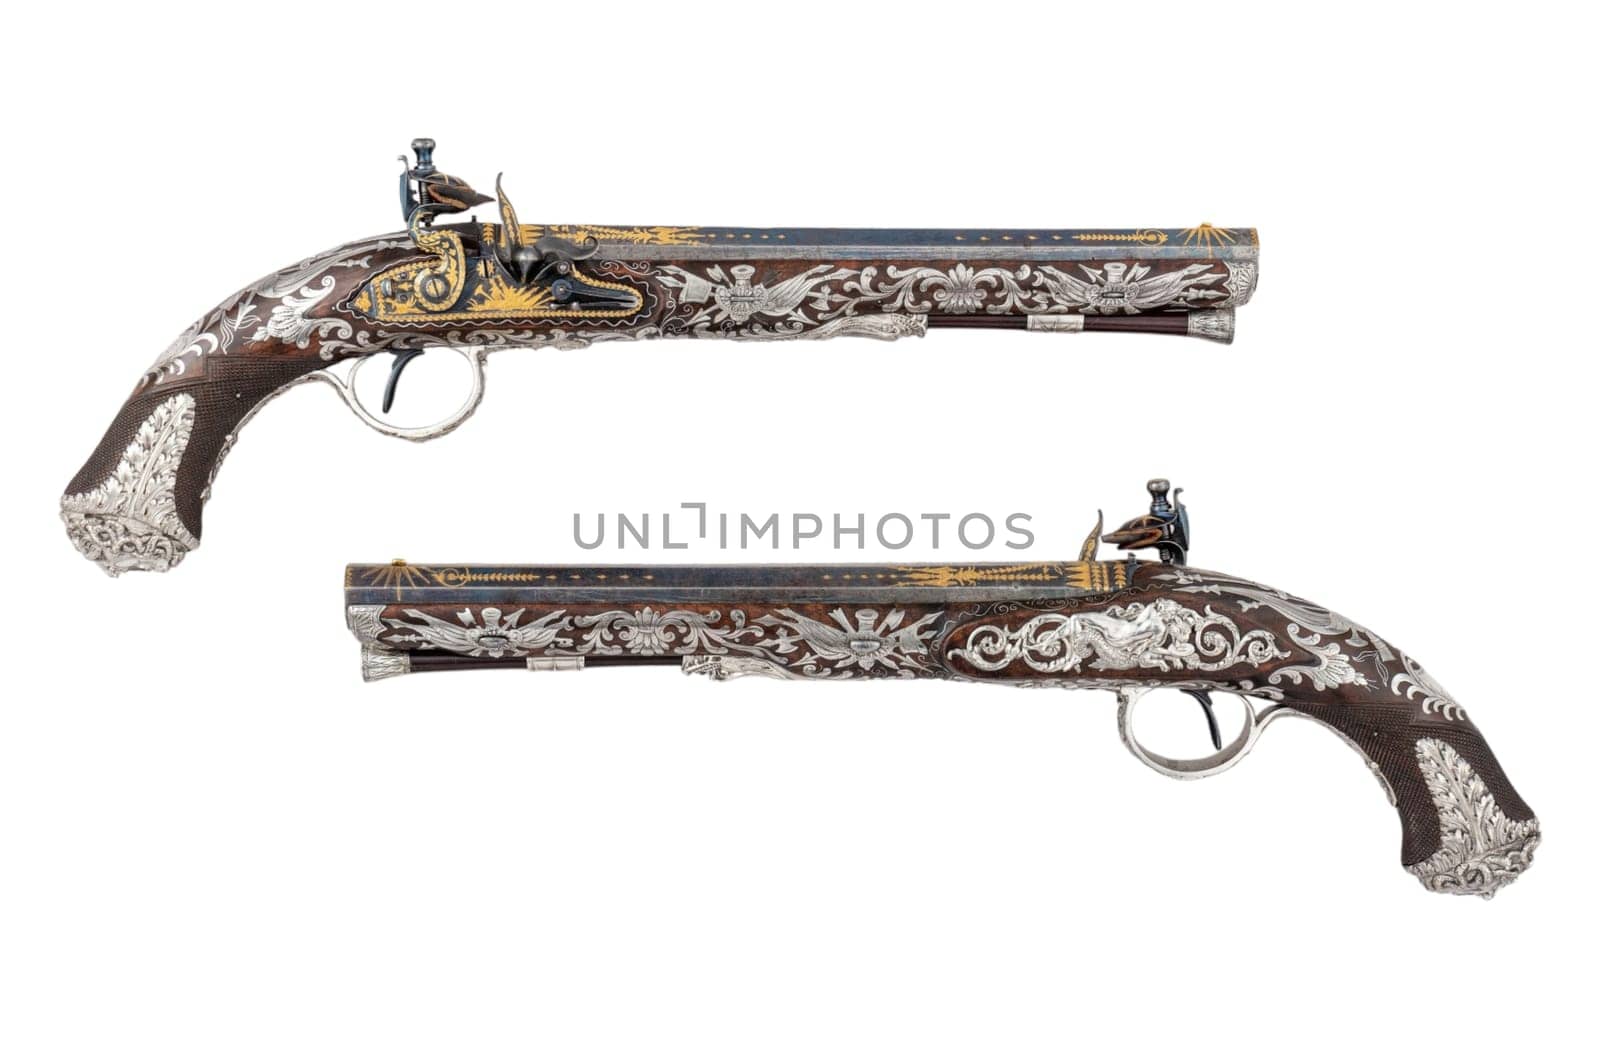 These pistols rank among the most lavishly embellished Neoclassical English firearms known. They are the masterpieces of Samuel Brunn